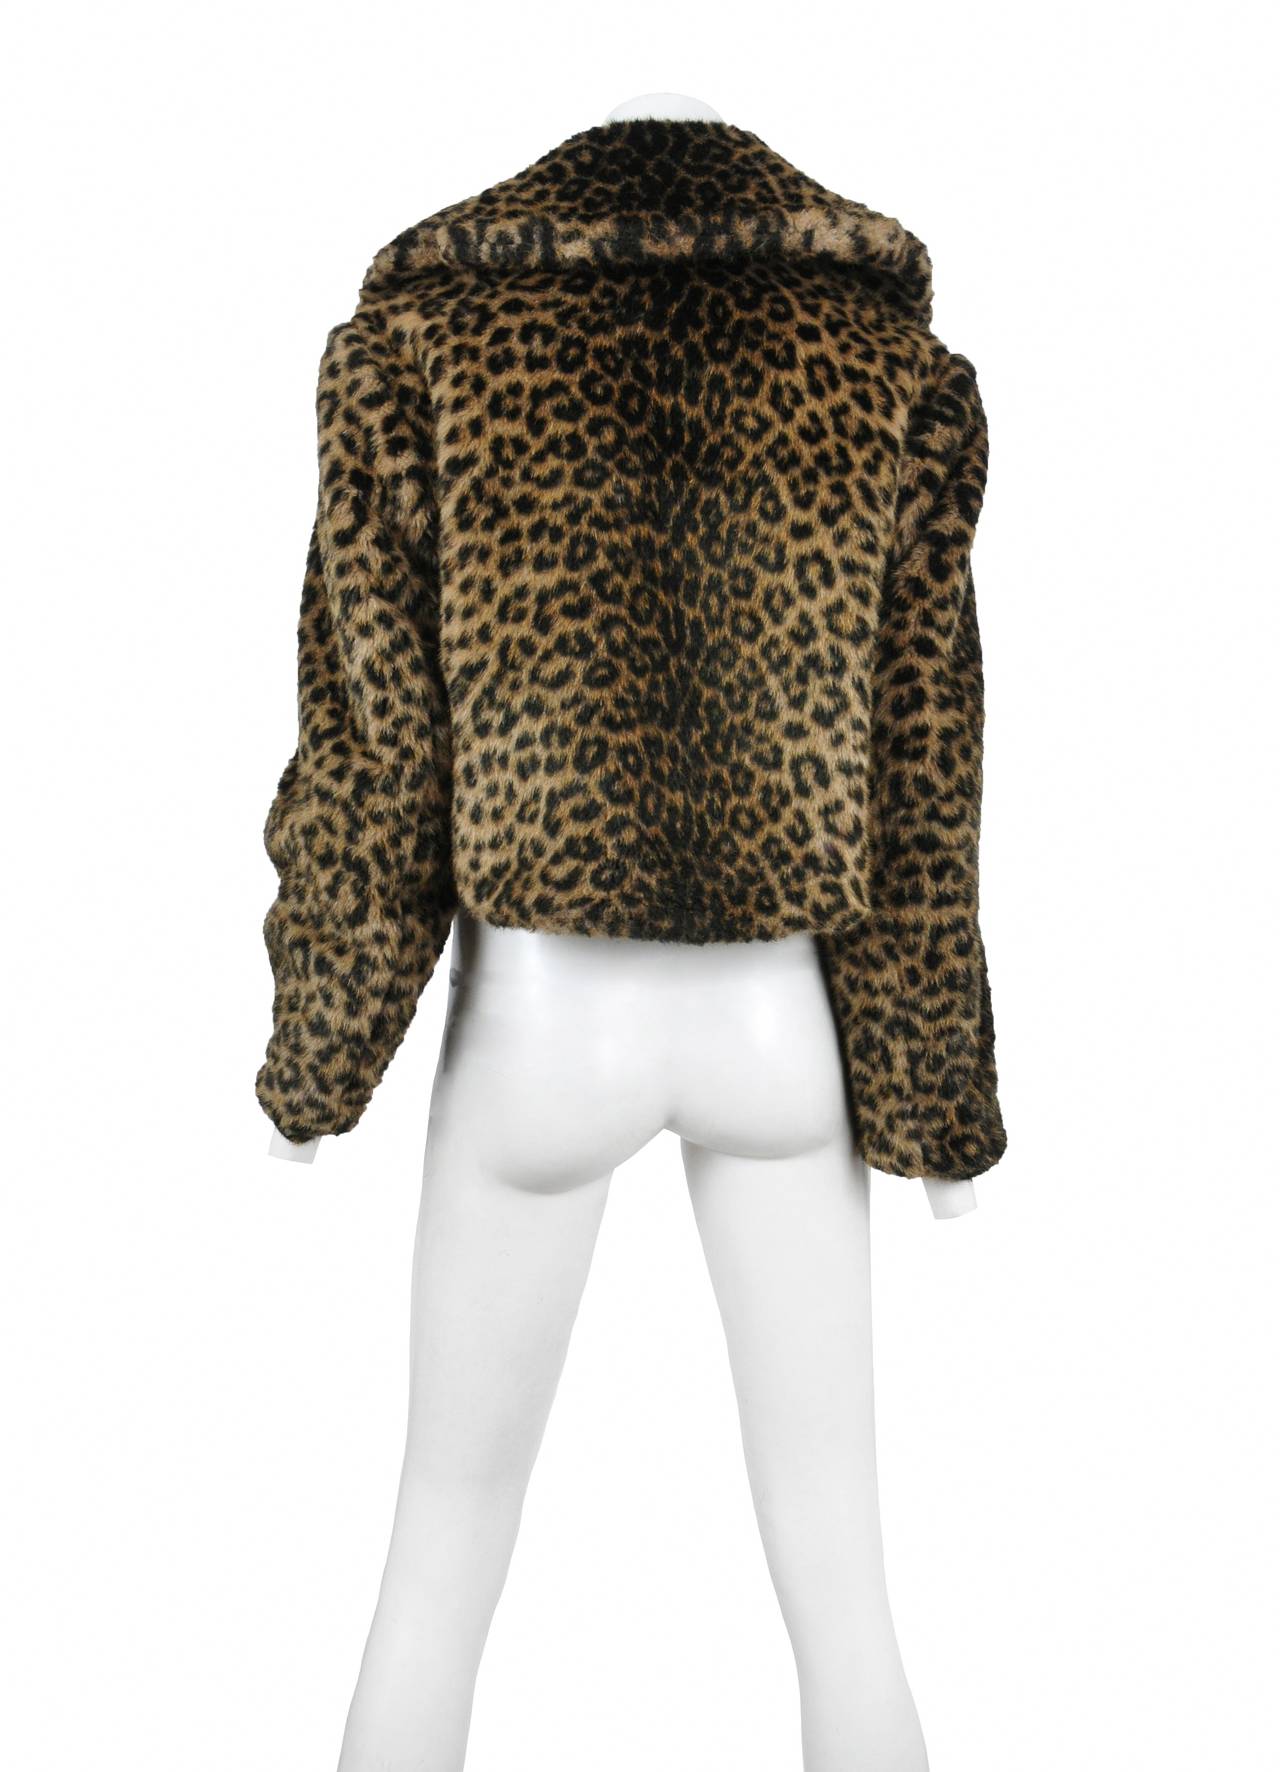 Vintage Alaia faux leopard cropped coat with wide lapel and black frog closure at waist.